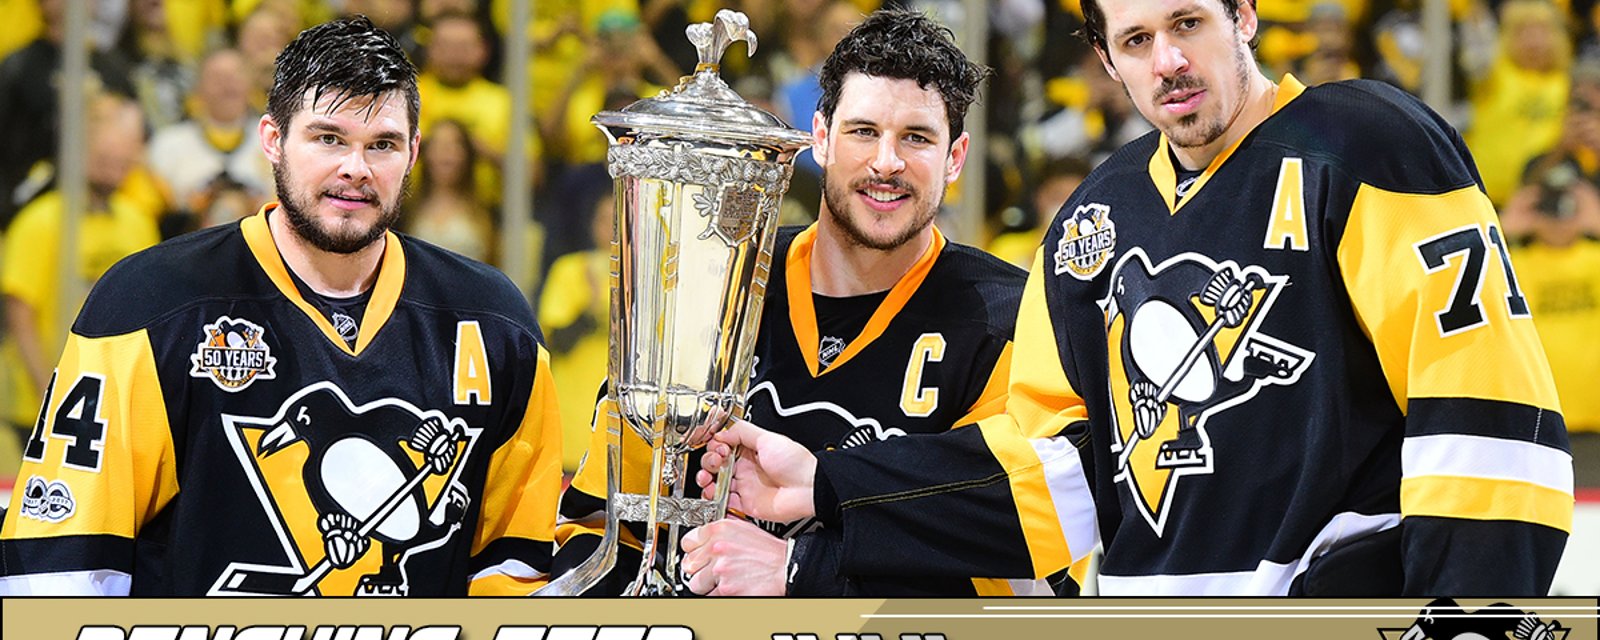 Gotta See It: Go inside the Pens locker room as they celebrate with the Prince of Wales Trophy